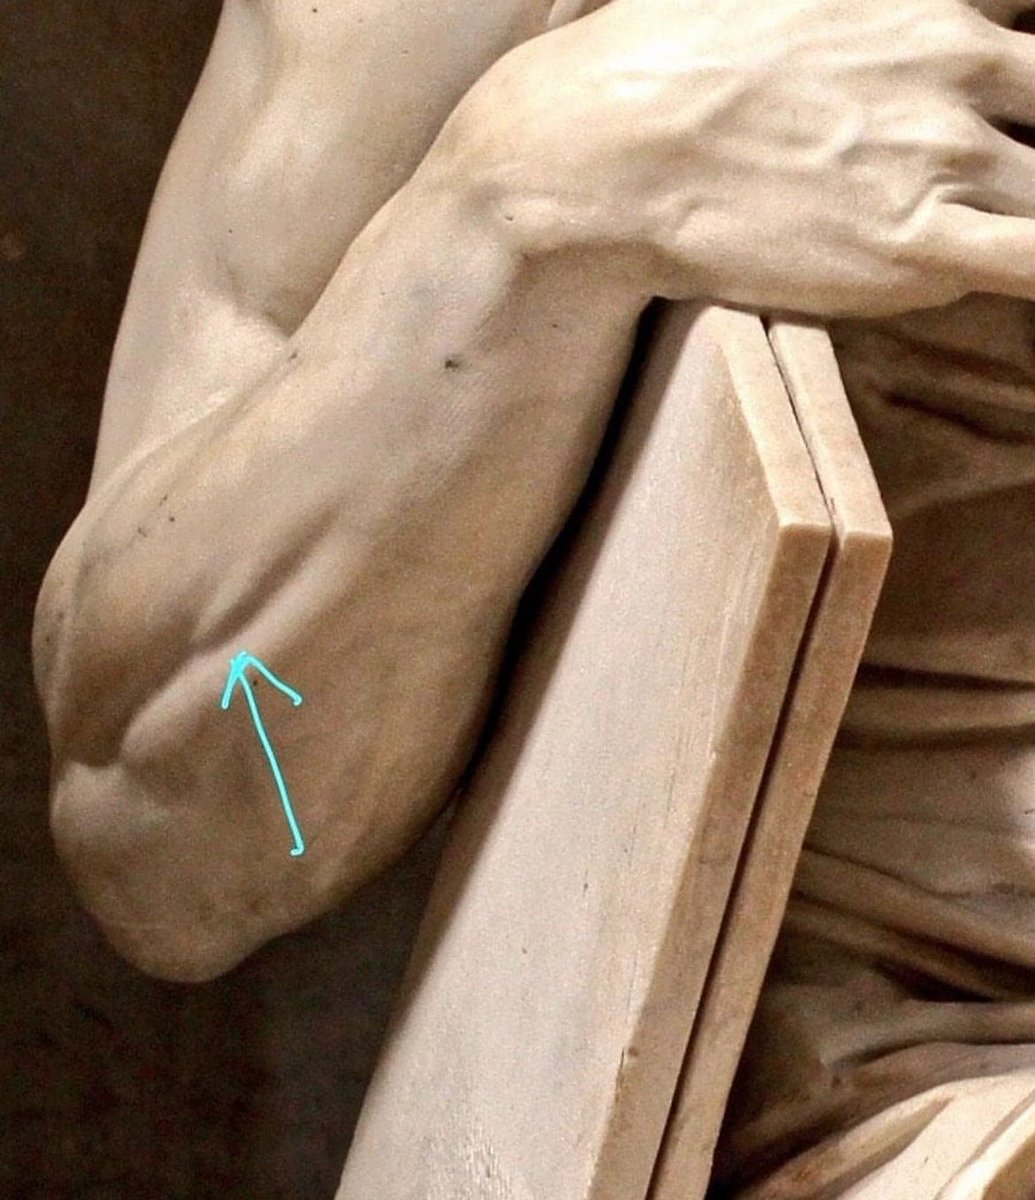 This is the right forearm of Michelangelo's Moses (c. 1513-1515) statue.

The arrow points to a small muscle called the extensor digiti minimi, which only contracts when the pinky is lifted, otherwise it is invisible.

Most of Michelangelo's sculptures are painstakingly detailed…